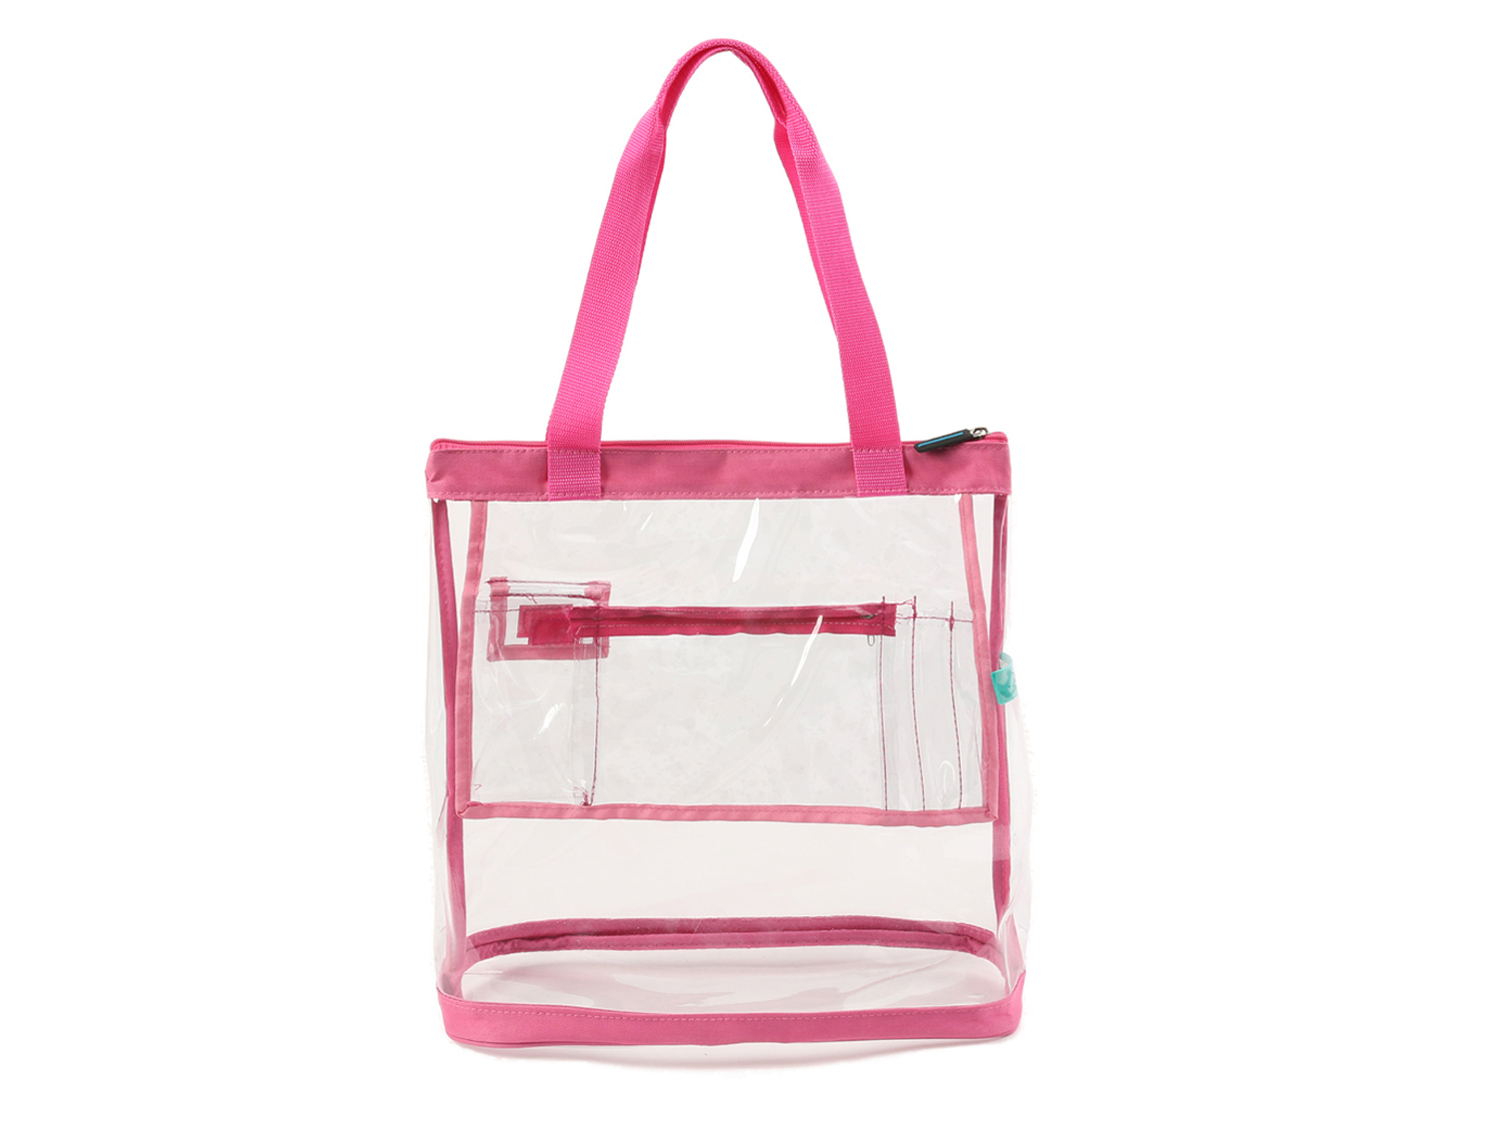 Clear Plastic Bag - Small Pink Tote 